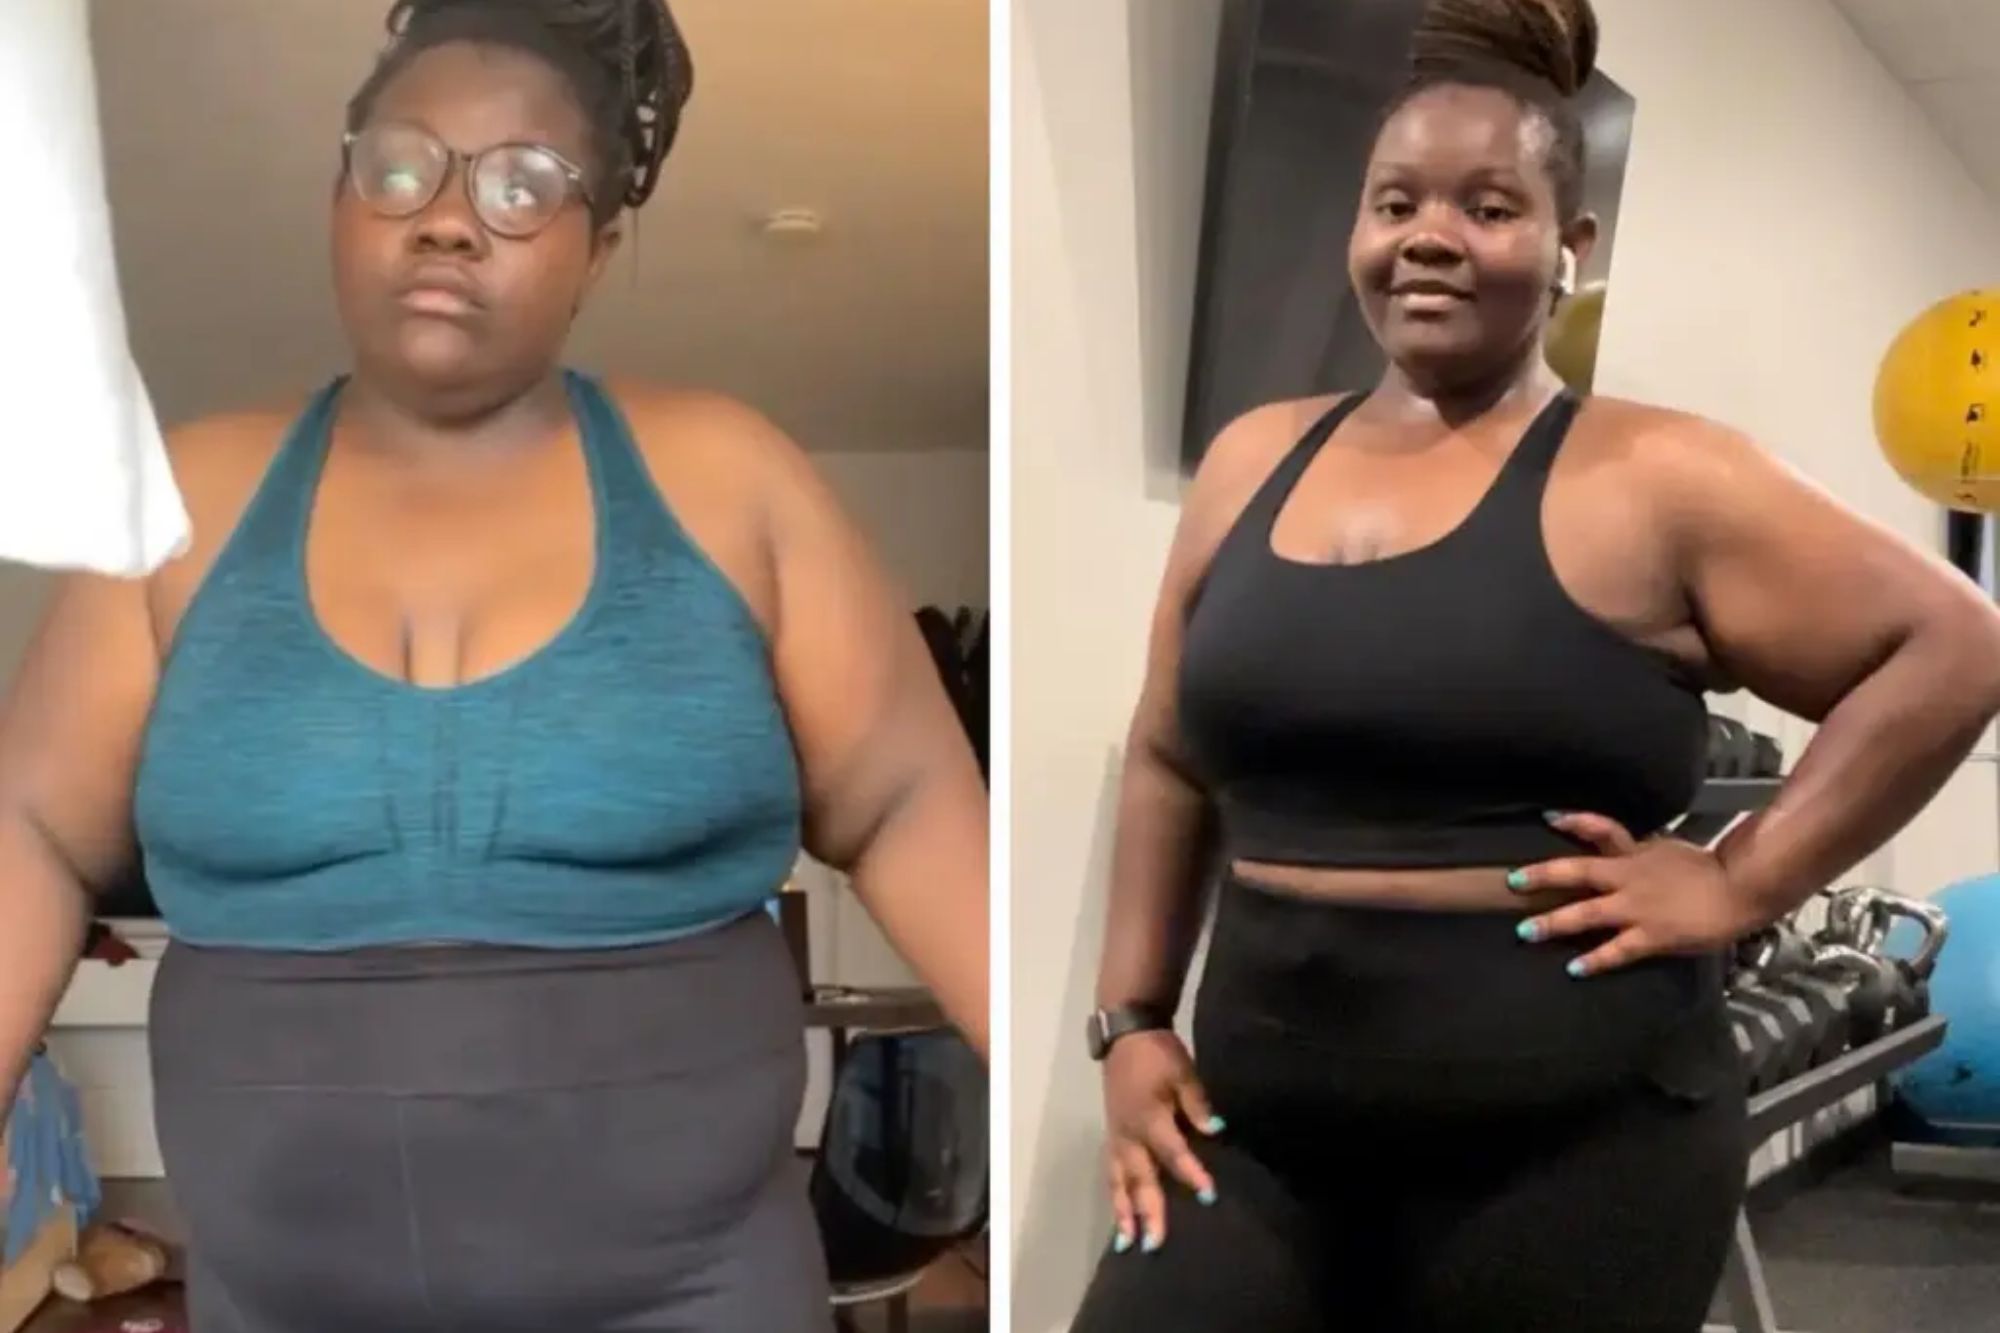 New Jersey resident Amanda Hinds is revealing how she shed 80 pounds and achieved her dream of becoming an indoor cycling instructor.